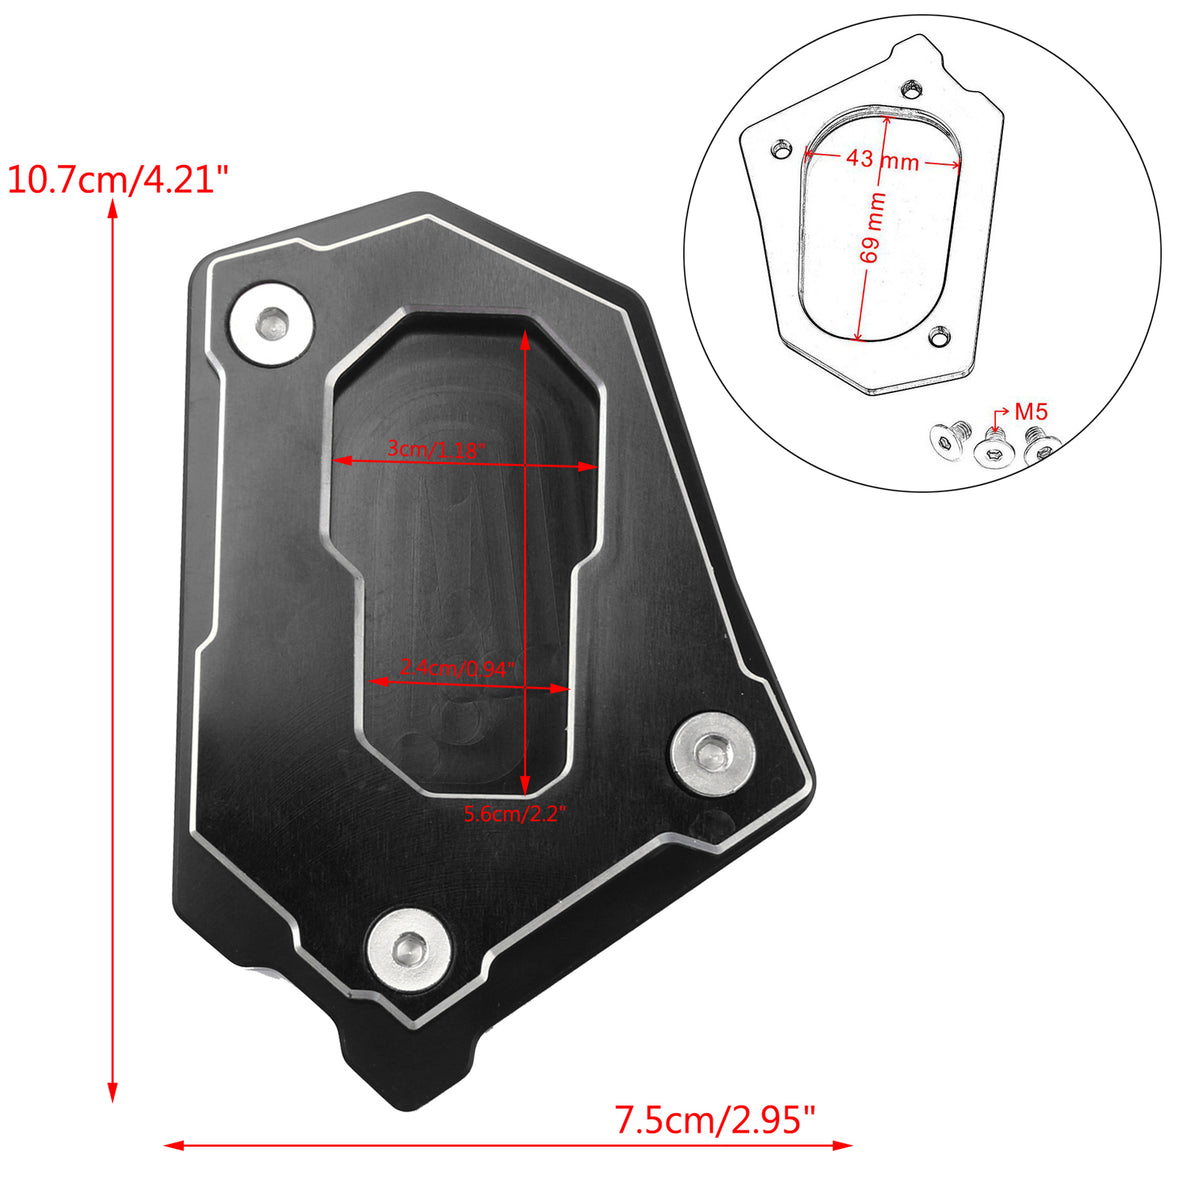 Kickstand Side Stand Enlarge Extension Plate For BMW R1200 GS Adv 14-16 Black